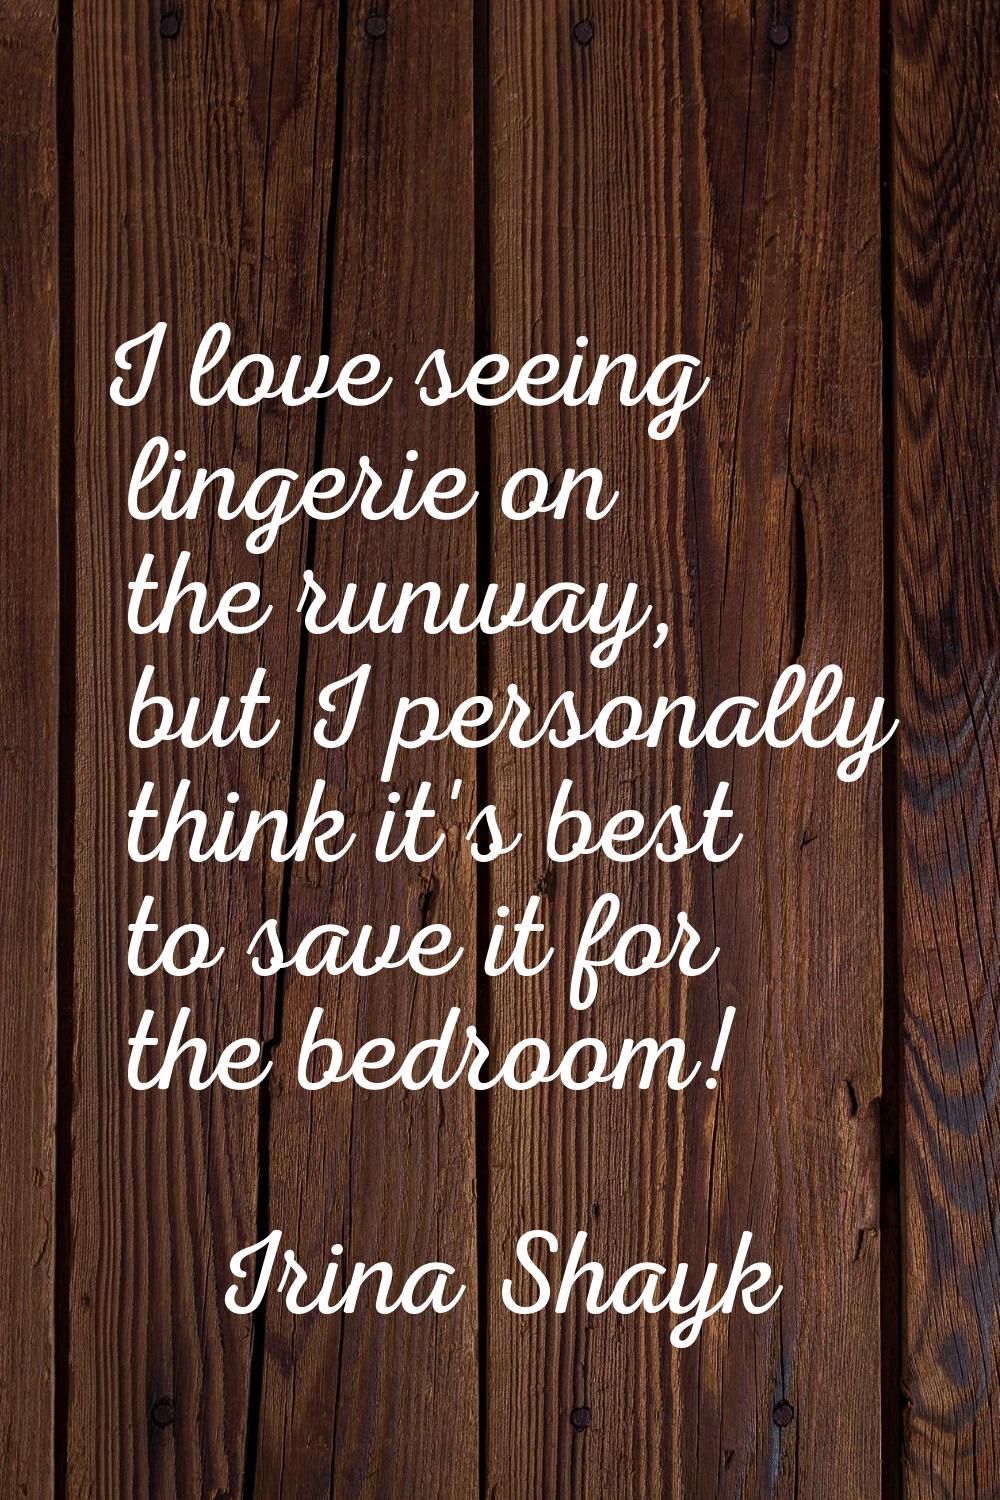 I love seeing lingerie on the runway, but I personally think it's best to save it for the bedroom!